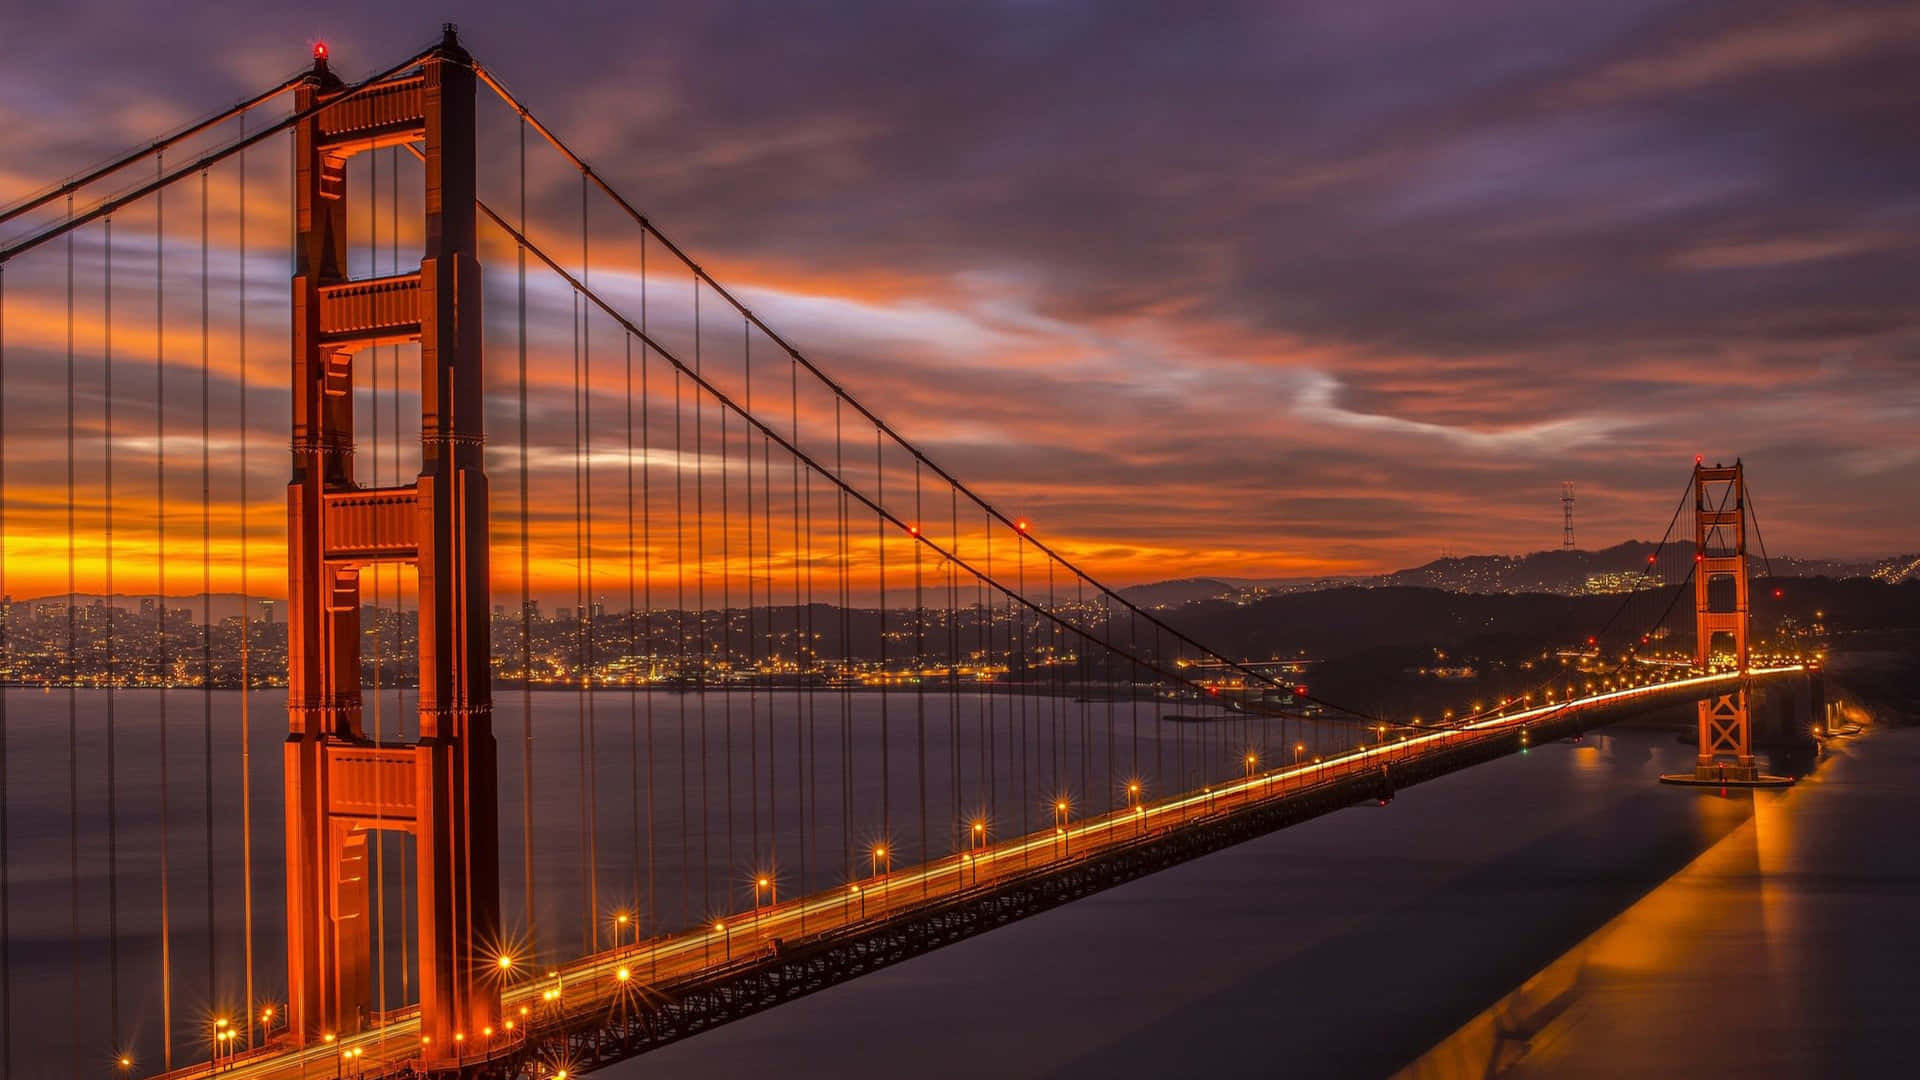 Explore San Francisco from the comfort of your laptop Wallpaper